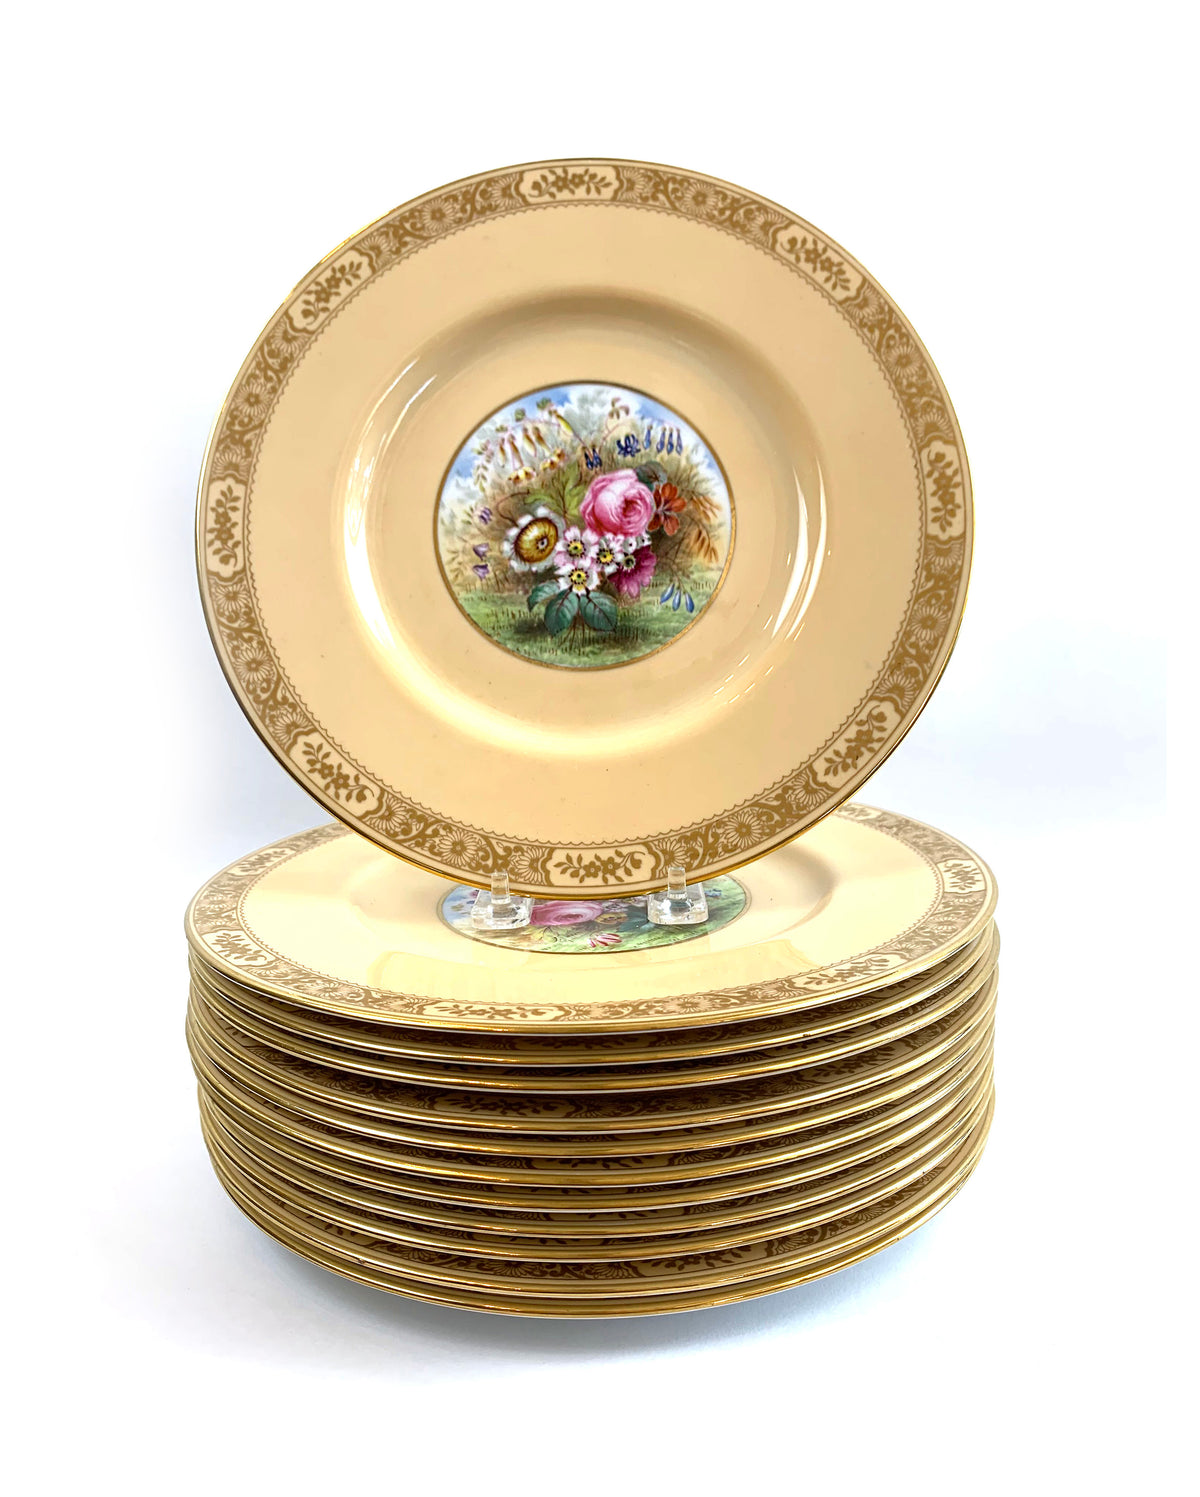 Set of Twelve Dinner Plates by Spode for Tiffany Beige with Floral Centers